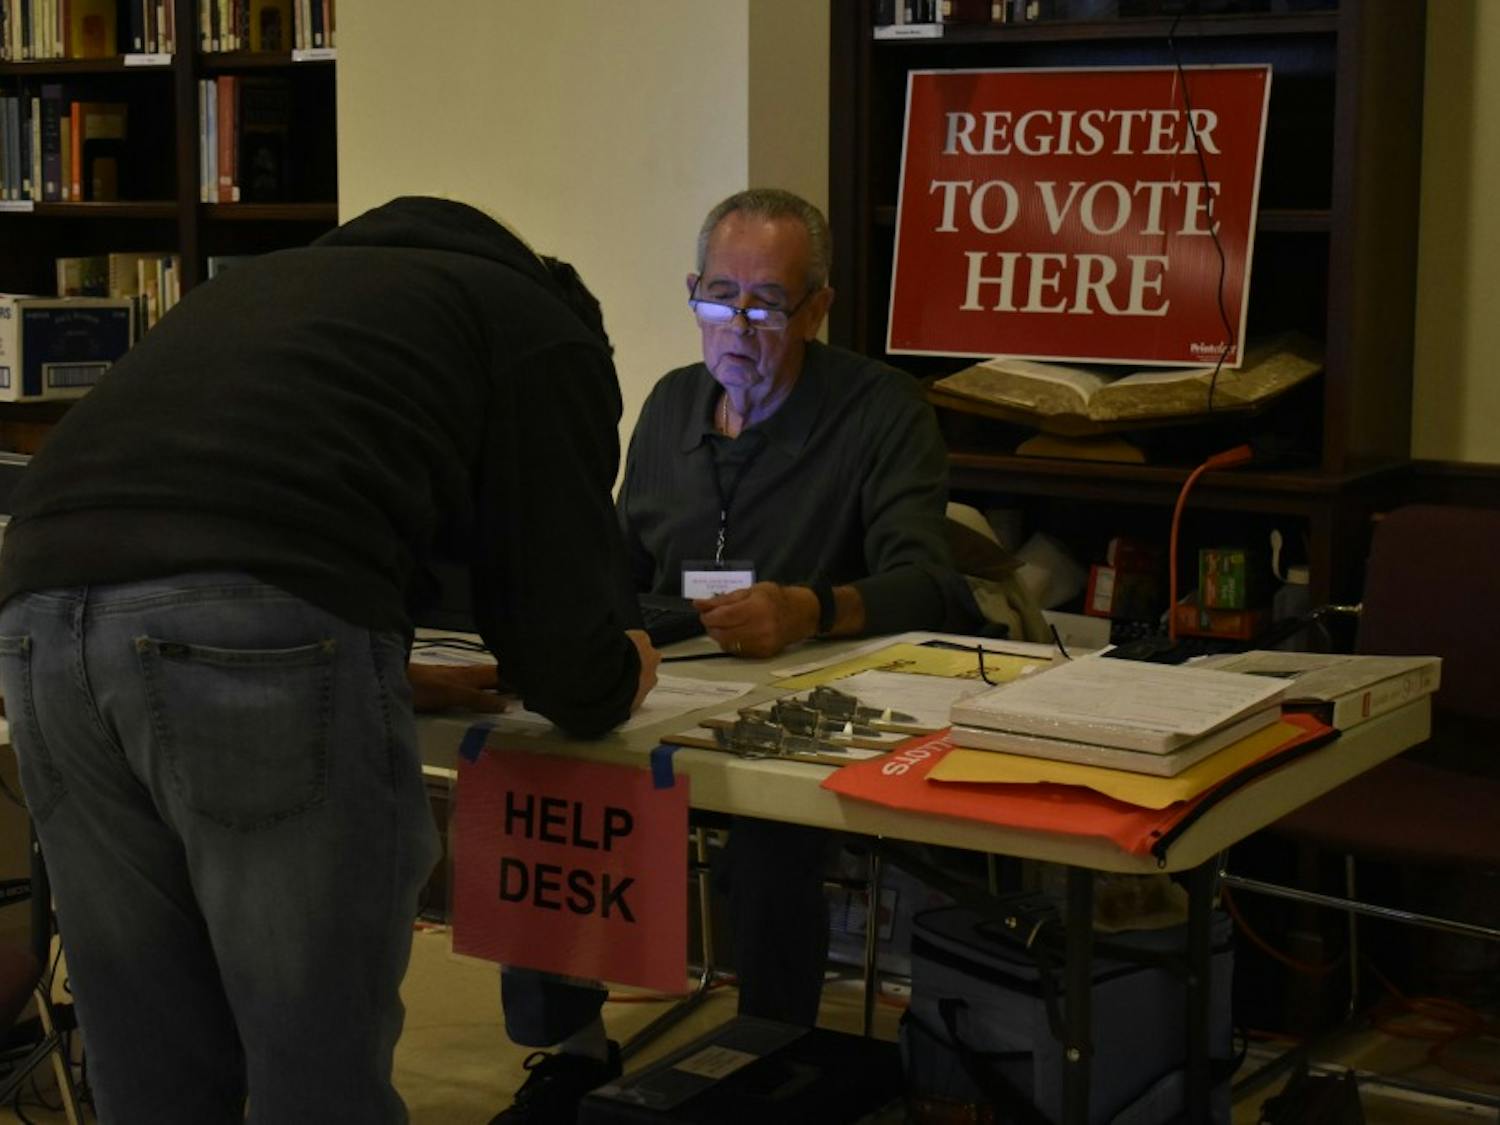 Precinct Chief Judge James Weathers volunteers at the Chapel of the Cross church at 304 E. Franklin St. on Oct. 23, 2018 helping voters register. The Chapel of the Cross severs as an early voter location close to the University of North Carolina at Chapel Hill's campus. 